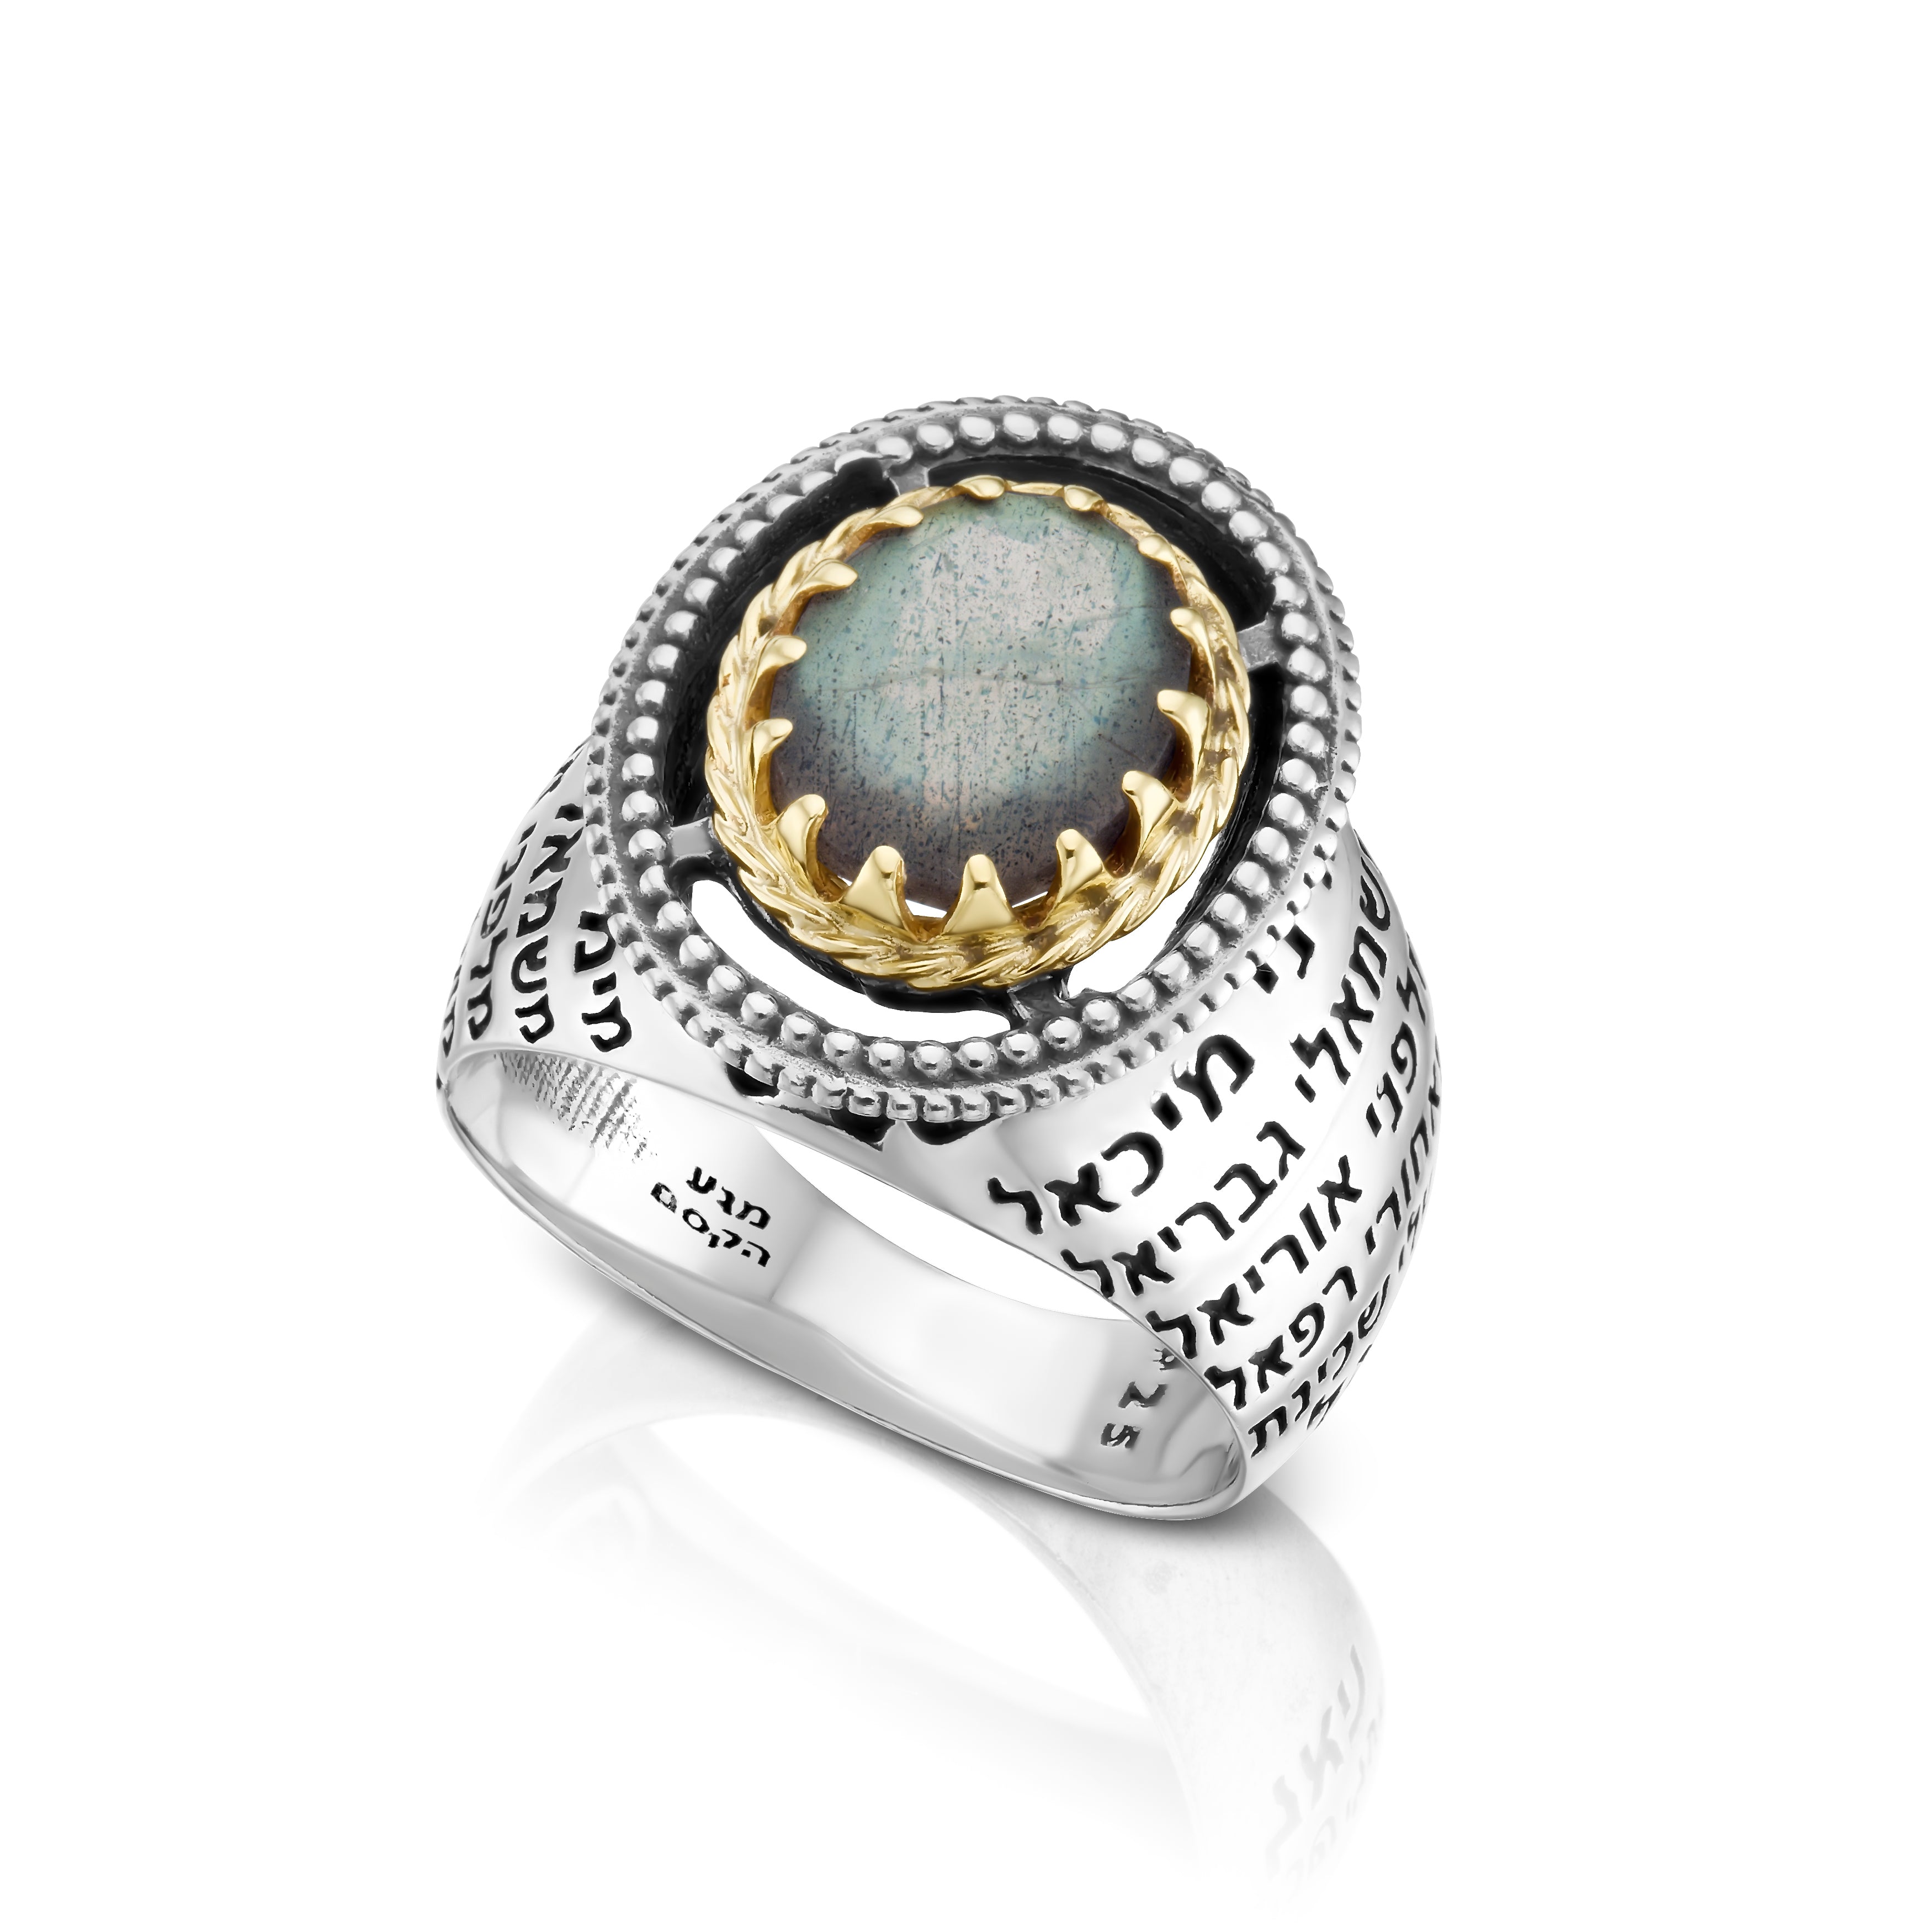 Angels' Names: Silver and Gold Ring with Labradorite Stone